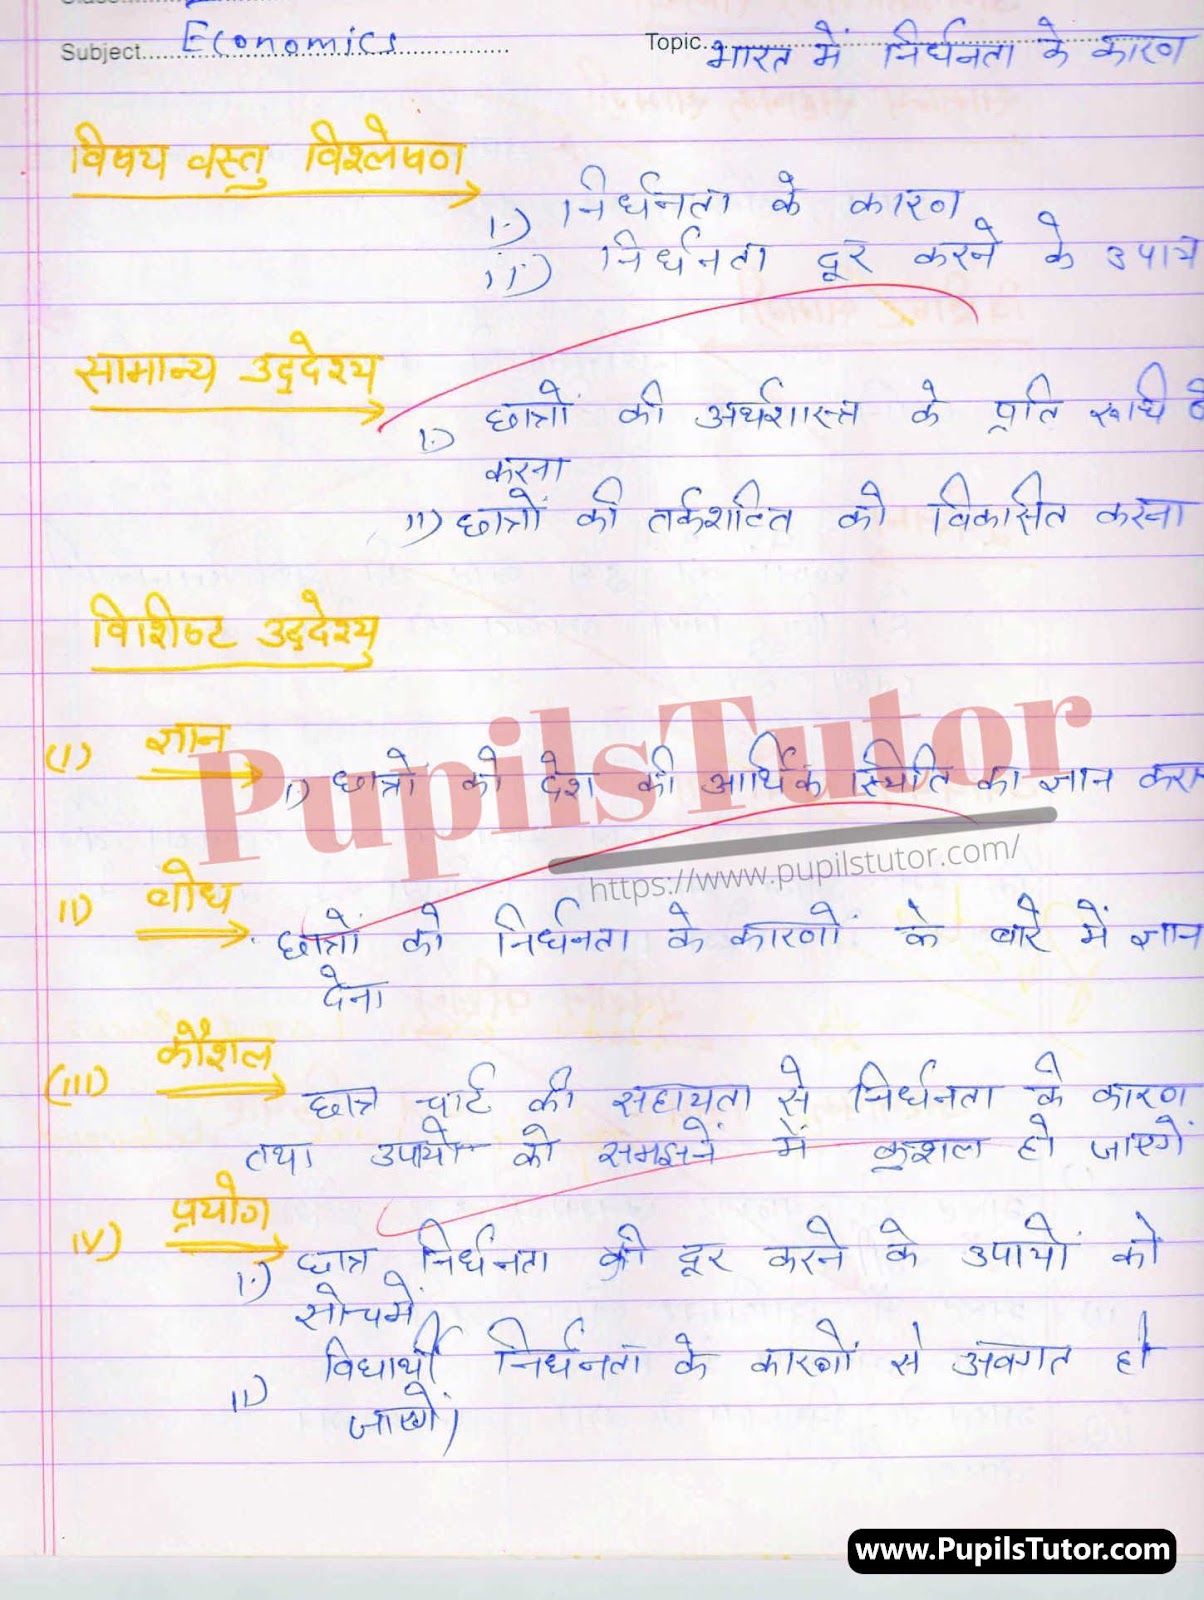 Nirdhanta Ka Karan Lesson Plan | Causes Of Poverty Lesson Plan In Hindi For Class 9, 10, 11 And 12 – (Page And Image Number 1) – Pupils Tutor